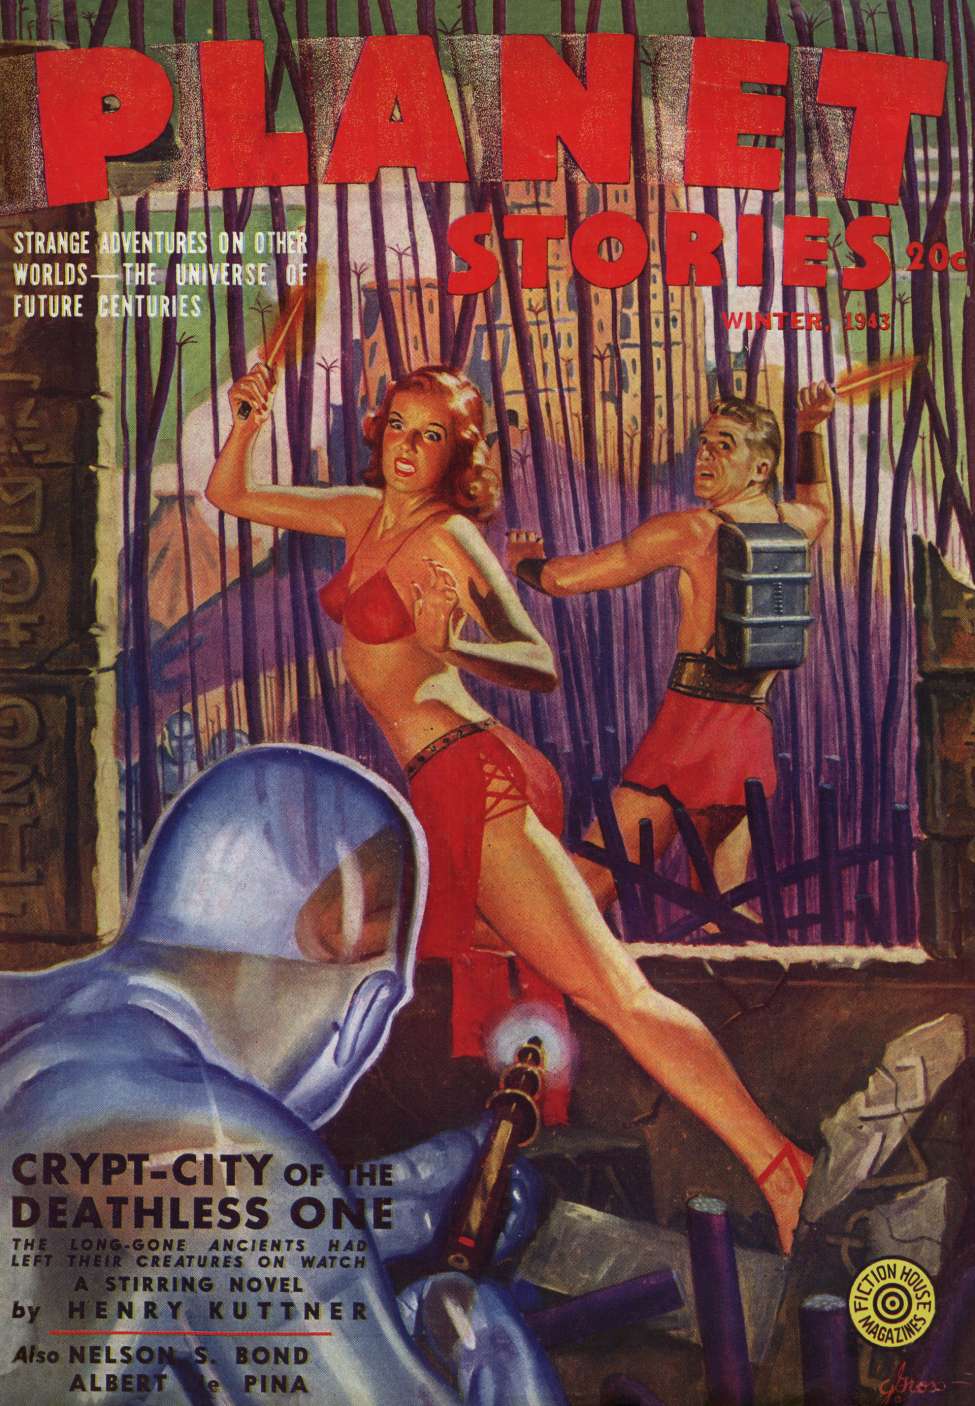 Comic Book Cover For Planet Stories v2 5 - Crypt-City of the Deathless One - Henry Kuttner